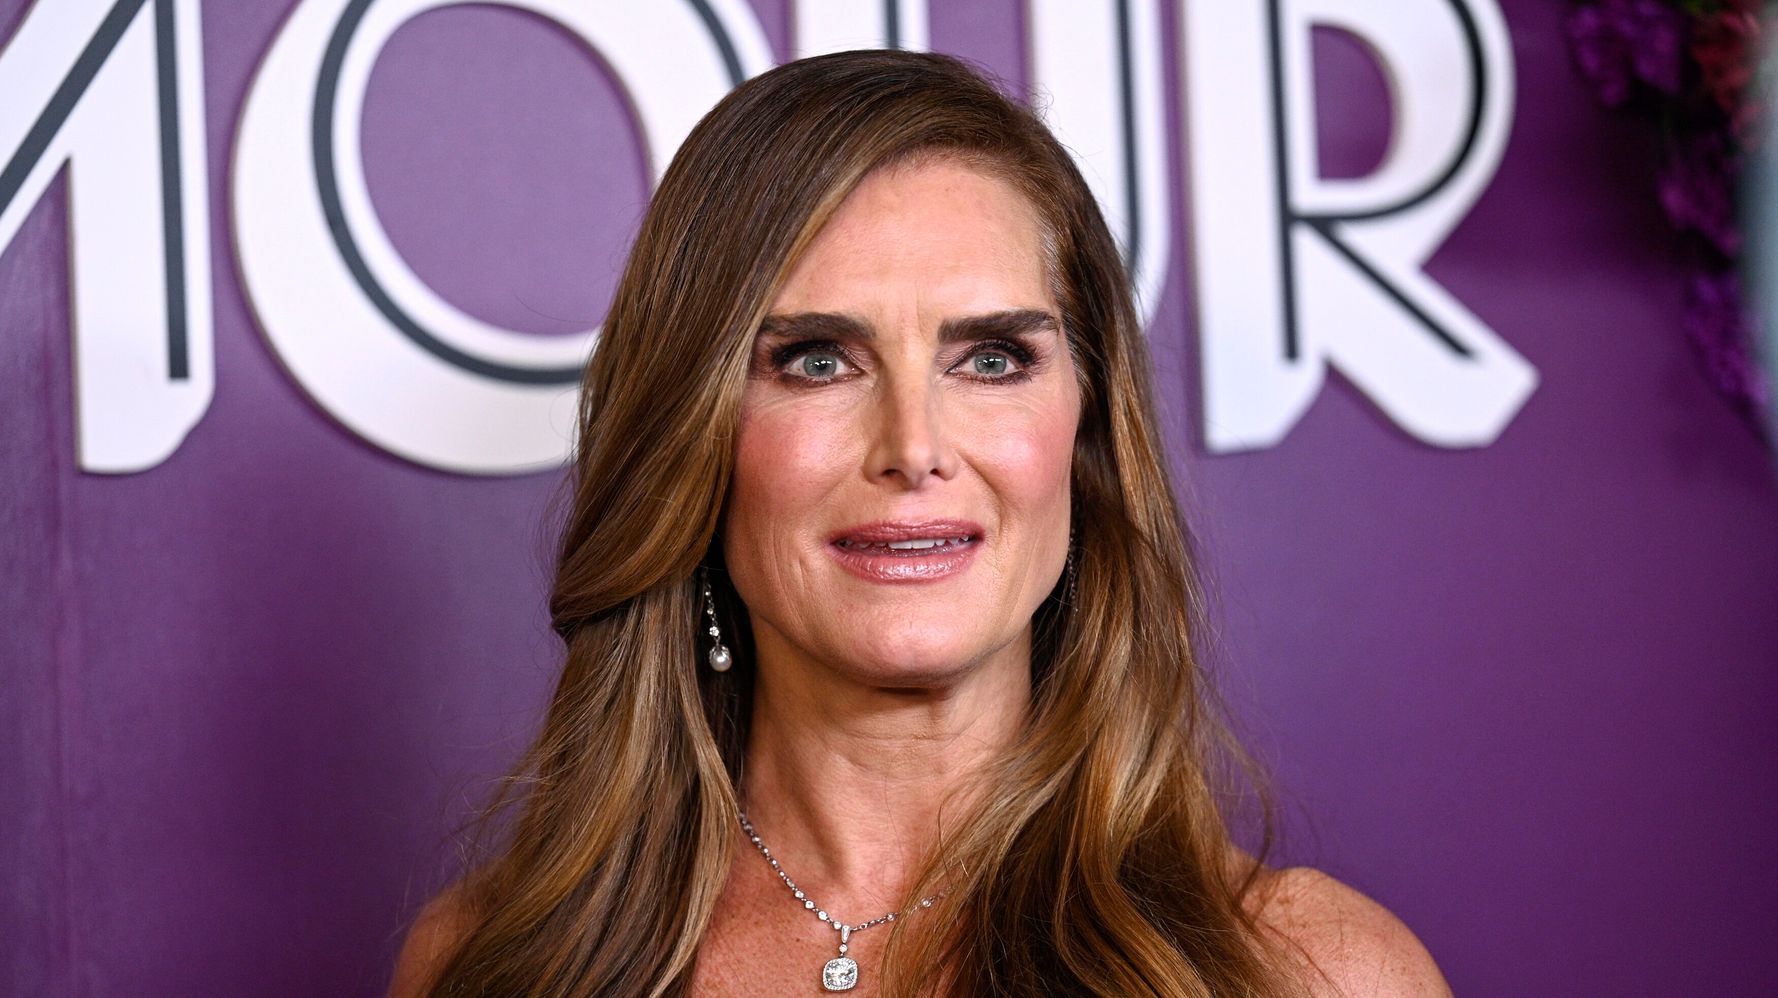 Brooke Shields Says Barbara Walters Interview Of Her Was 'Practically Criminal' - HuffPost